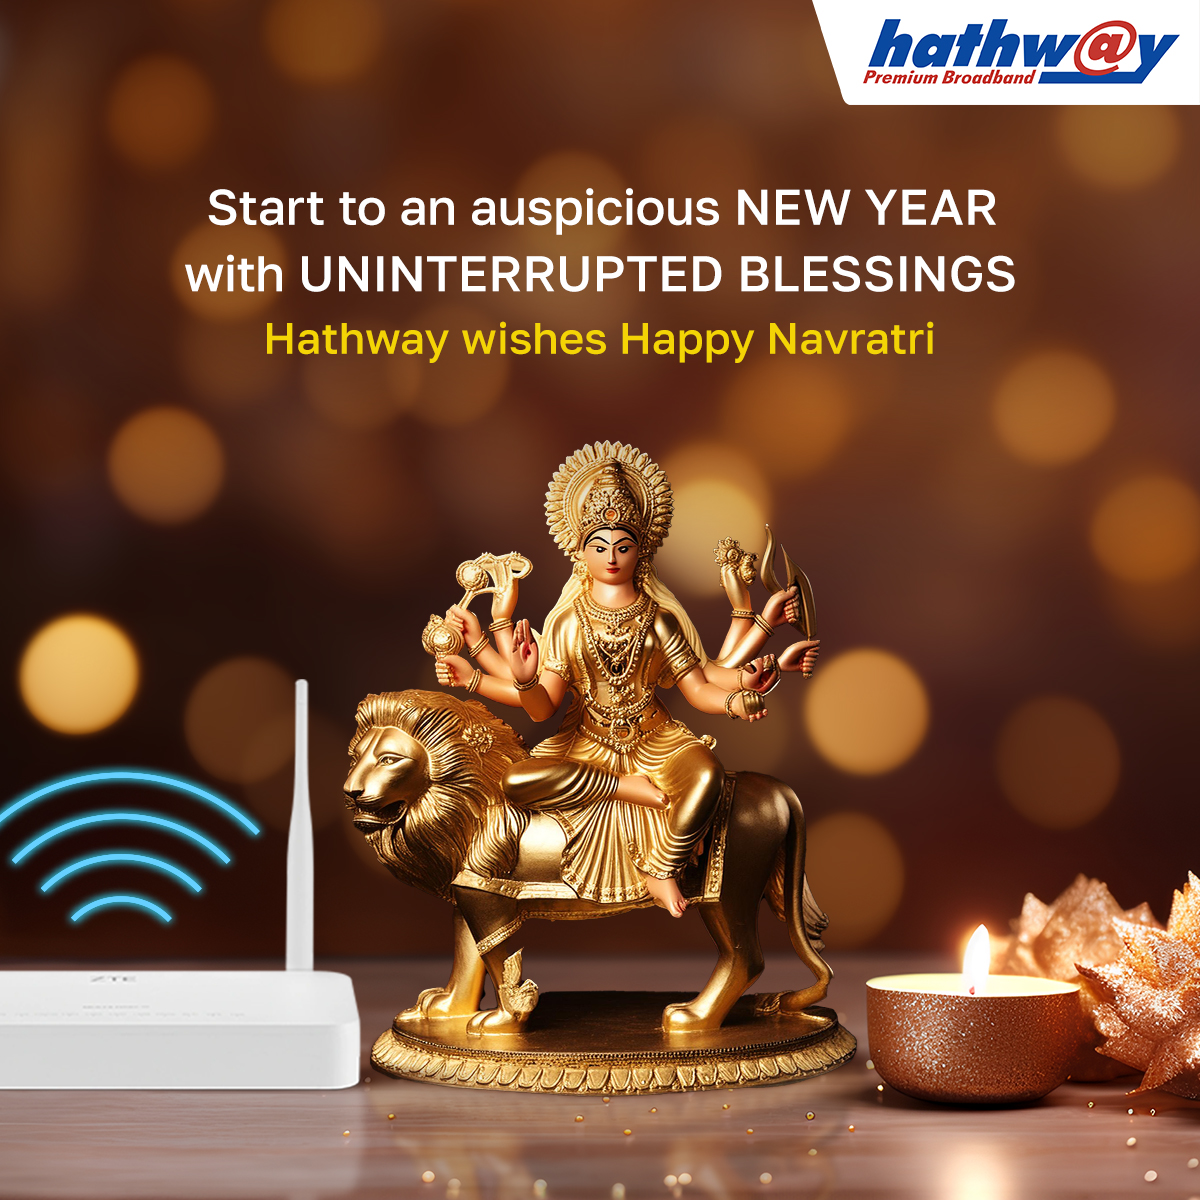 This Navratri keep surfing through endless blessings with friends and family! Hathway wishing you all a very happy and auspicious #Navratri! #Hathway #Navratri2024 #NavratriSpecial #HathwayBroadband #BroadbandConnection #InternetConnection #Broadband